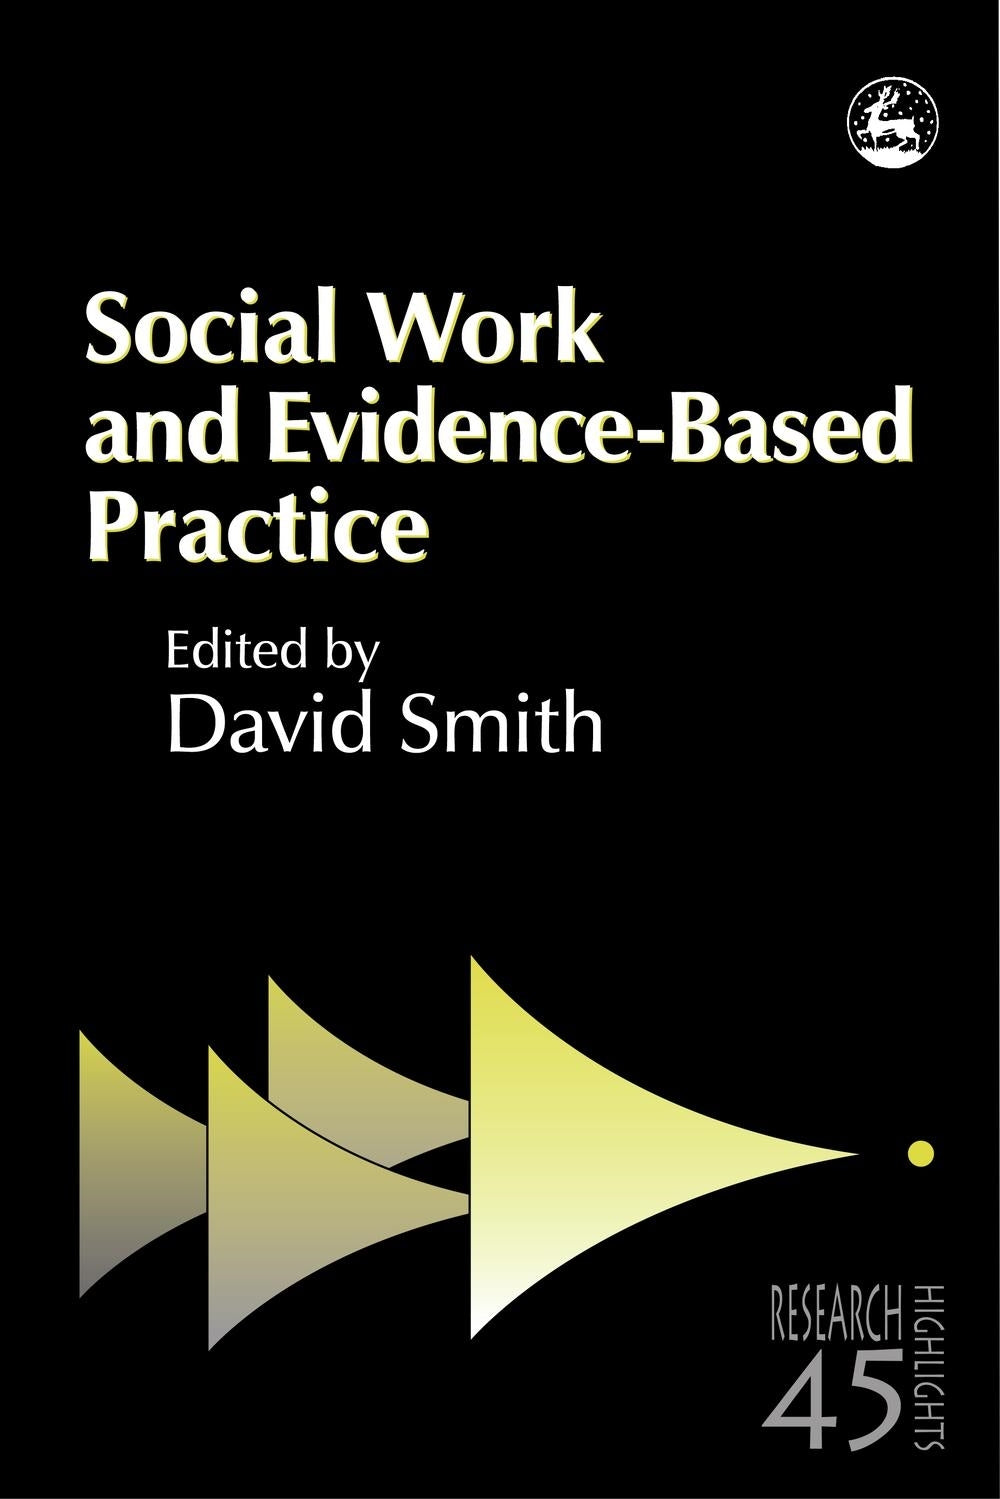 Social Work and Evidence-Based Practice by David Smith